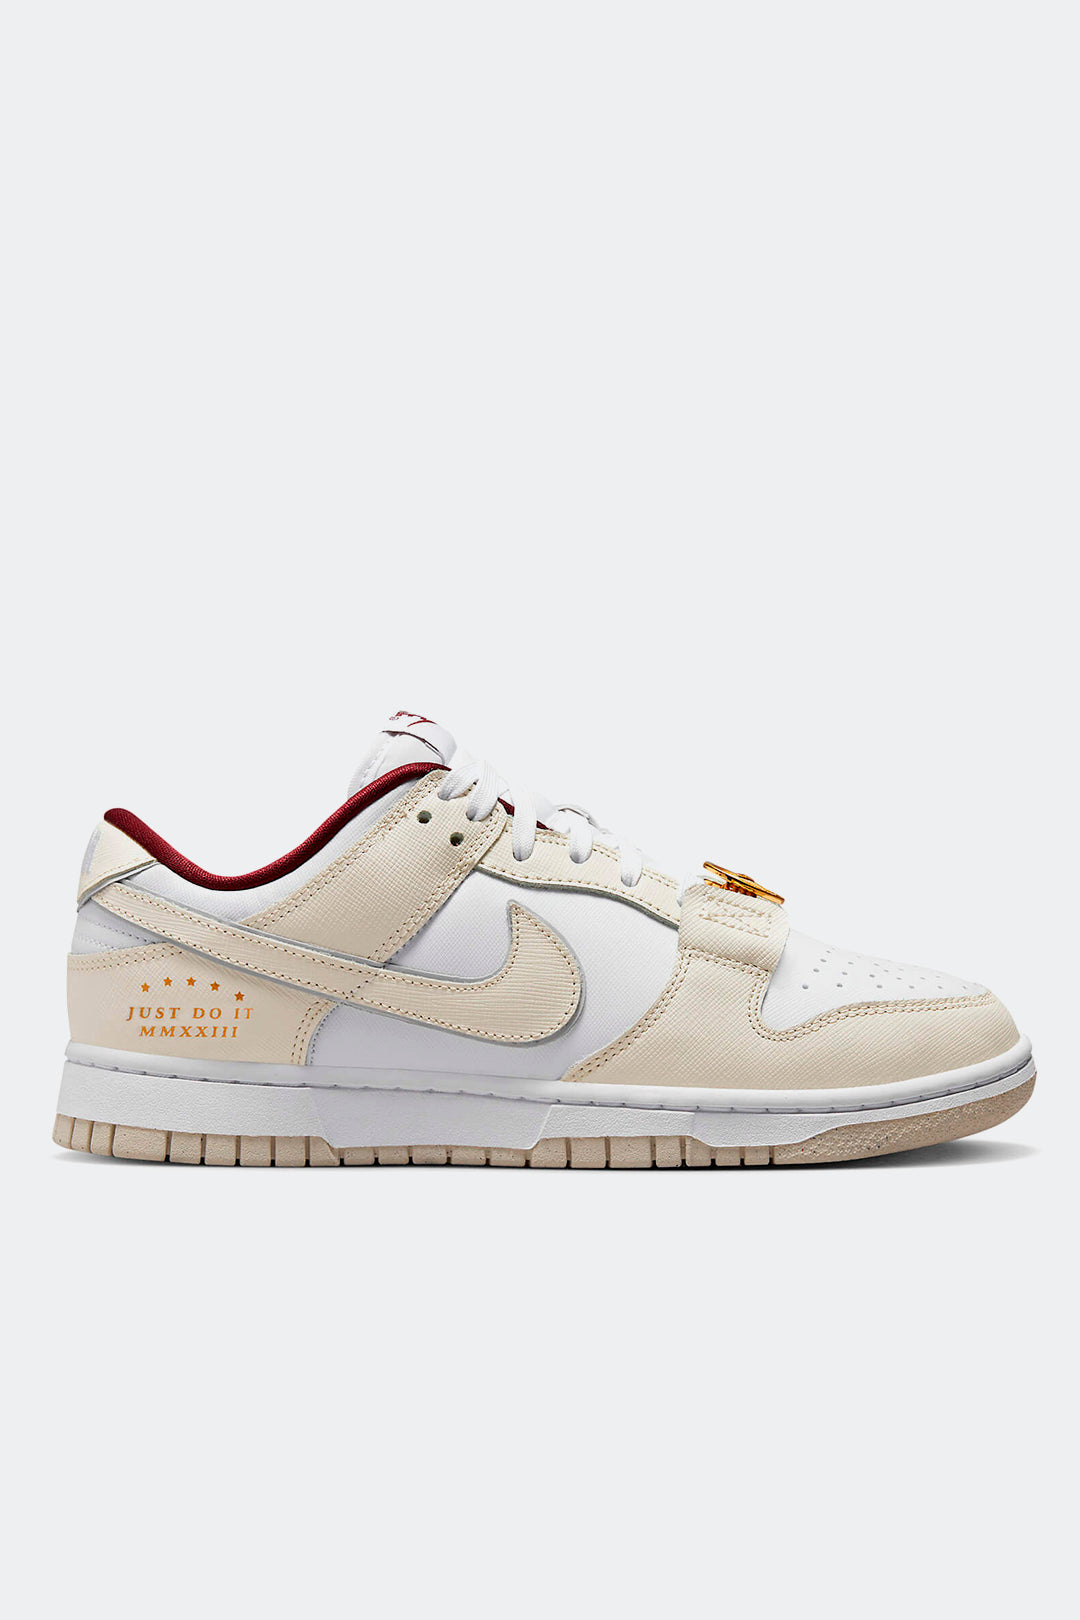 NIKE DUNK LOW "JUST DO IT" - MUJER - HYPE